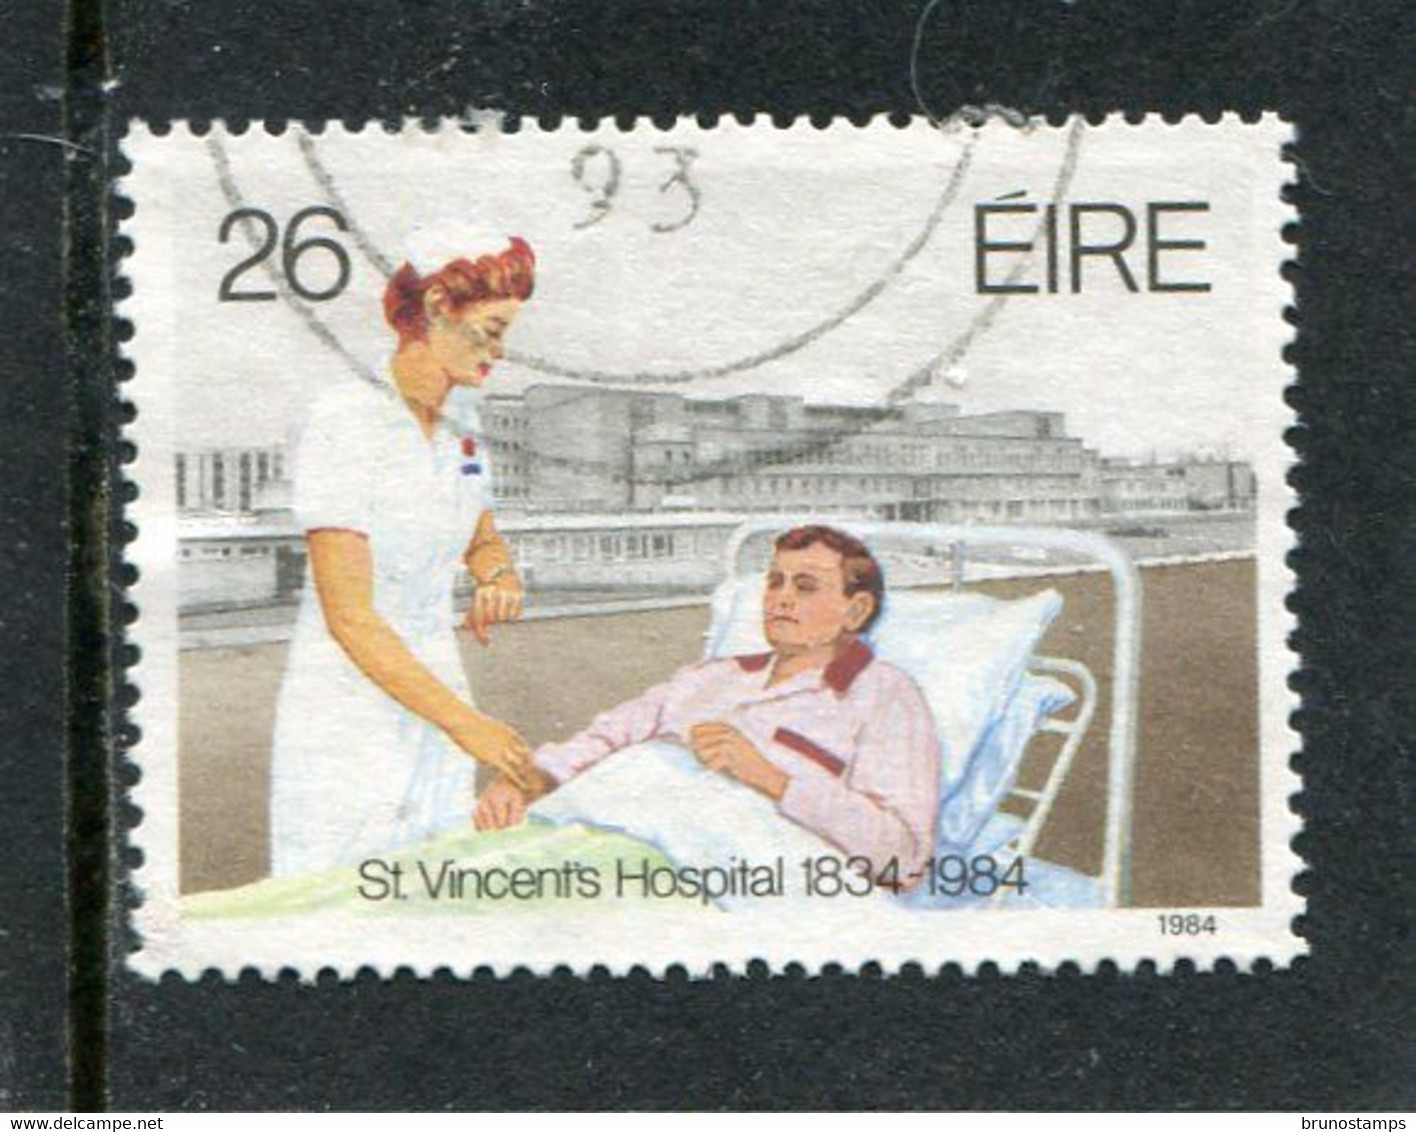 IRELAND/EIRE - 1984   26p  ST. VINCENT HOSPITAL  FINE USED - Used Stamps